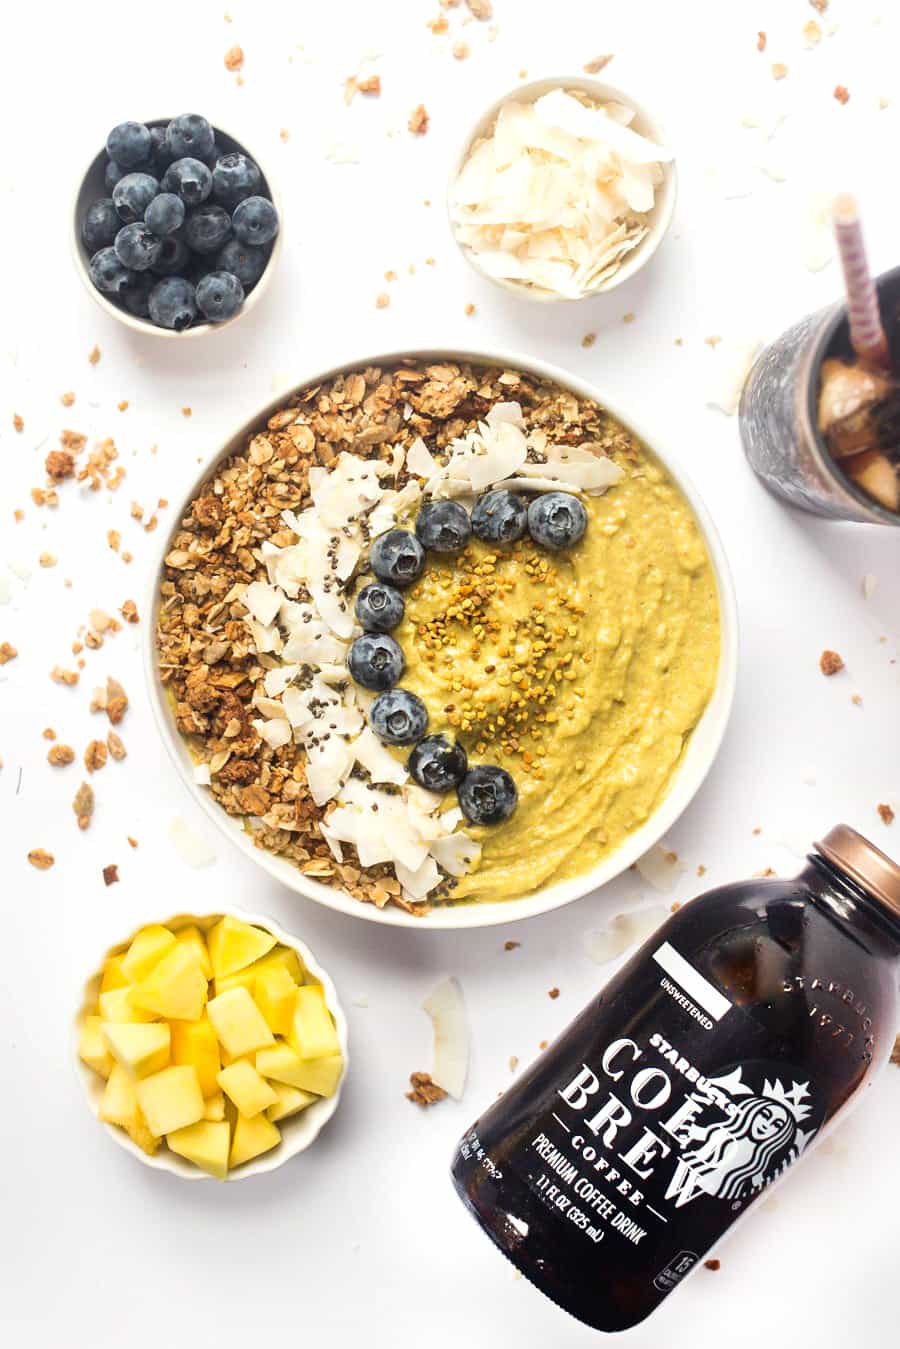 This ENERGIZING Mango Smoothie Bowl is made with fruits, veggies and superfoods to give you a natural boost of energy in the morning!